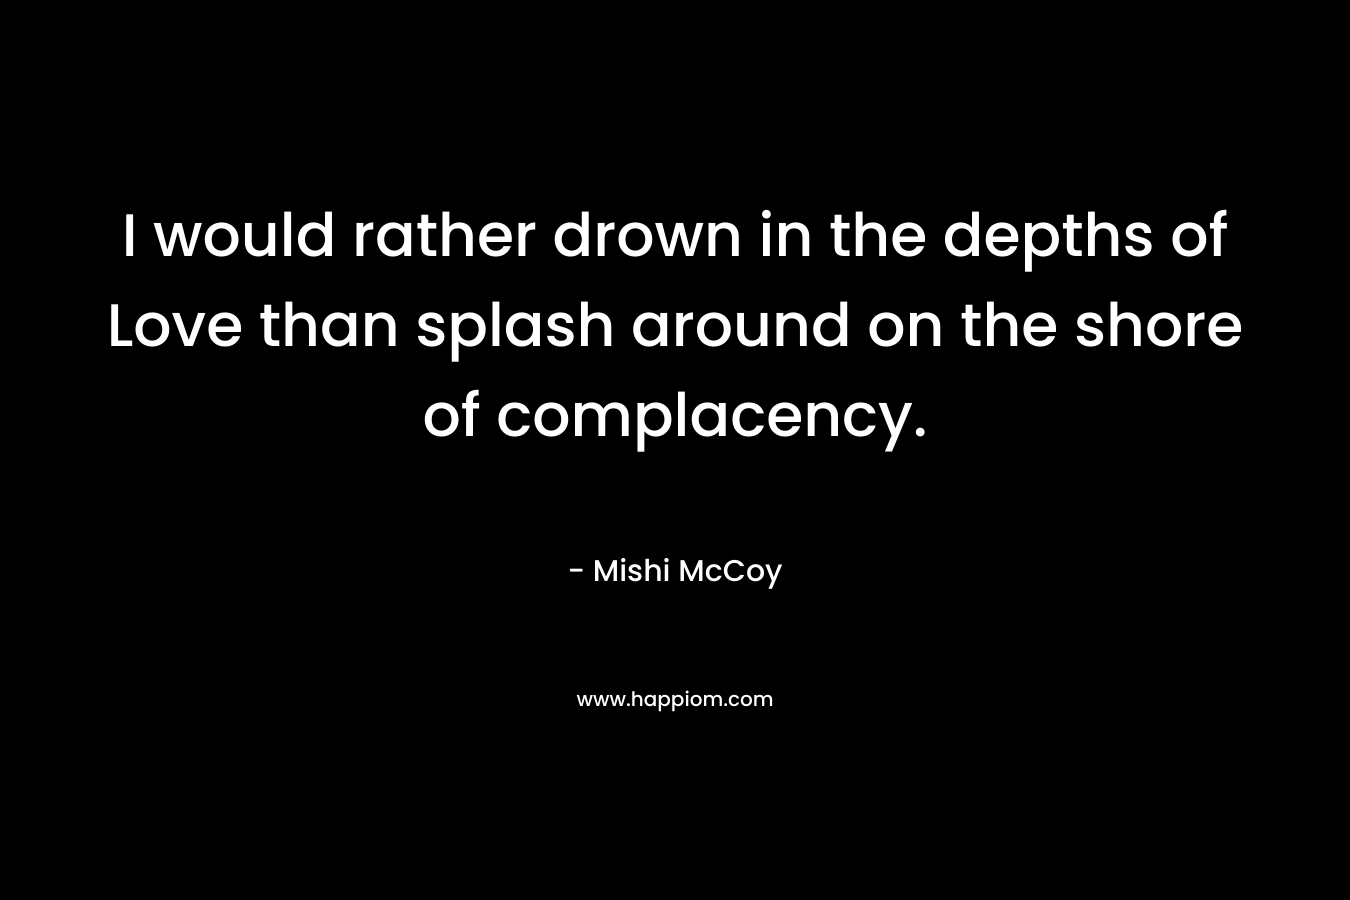 I would rather drown in the depths of Love than splash around on the shore of complacency.